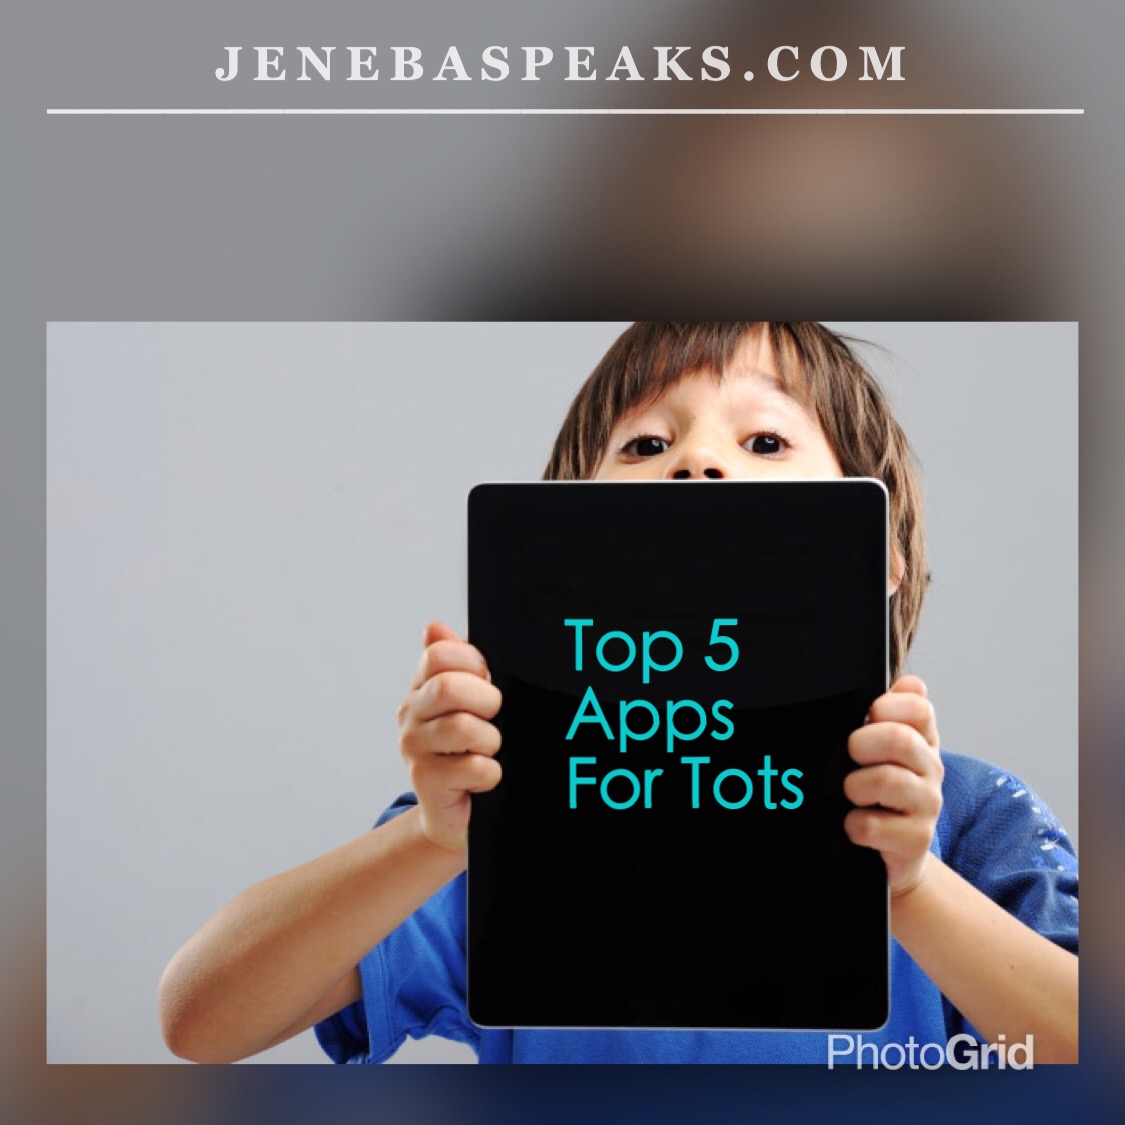 Top 5 Apps for Tots